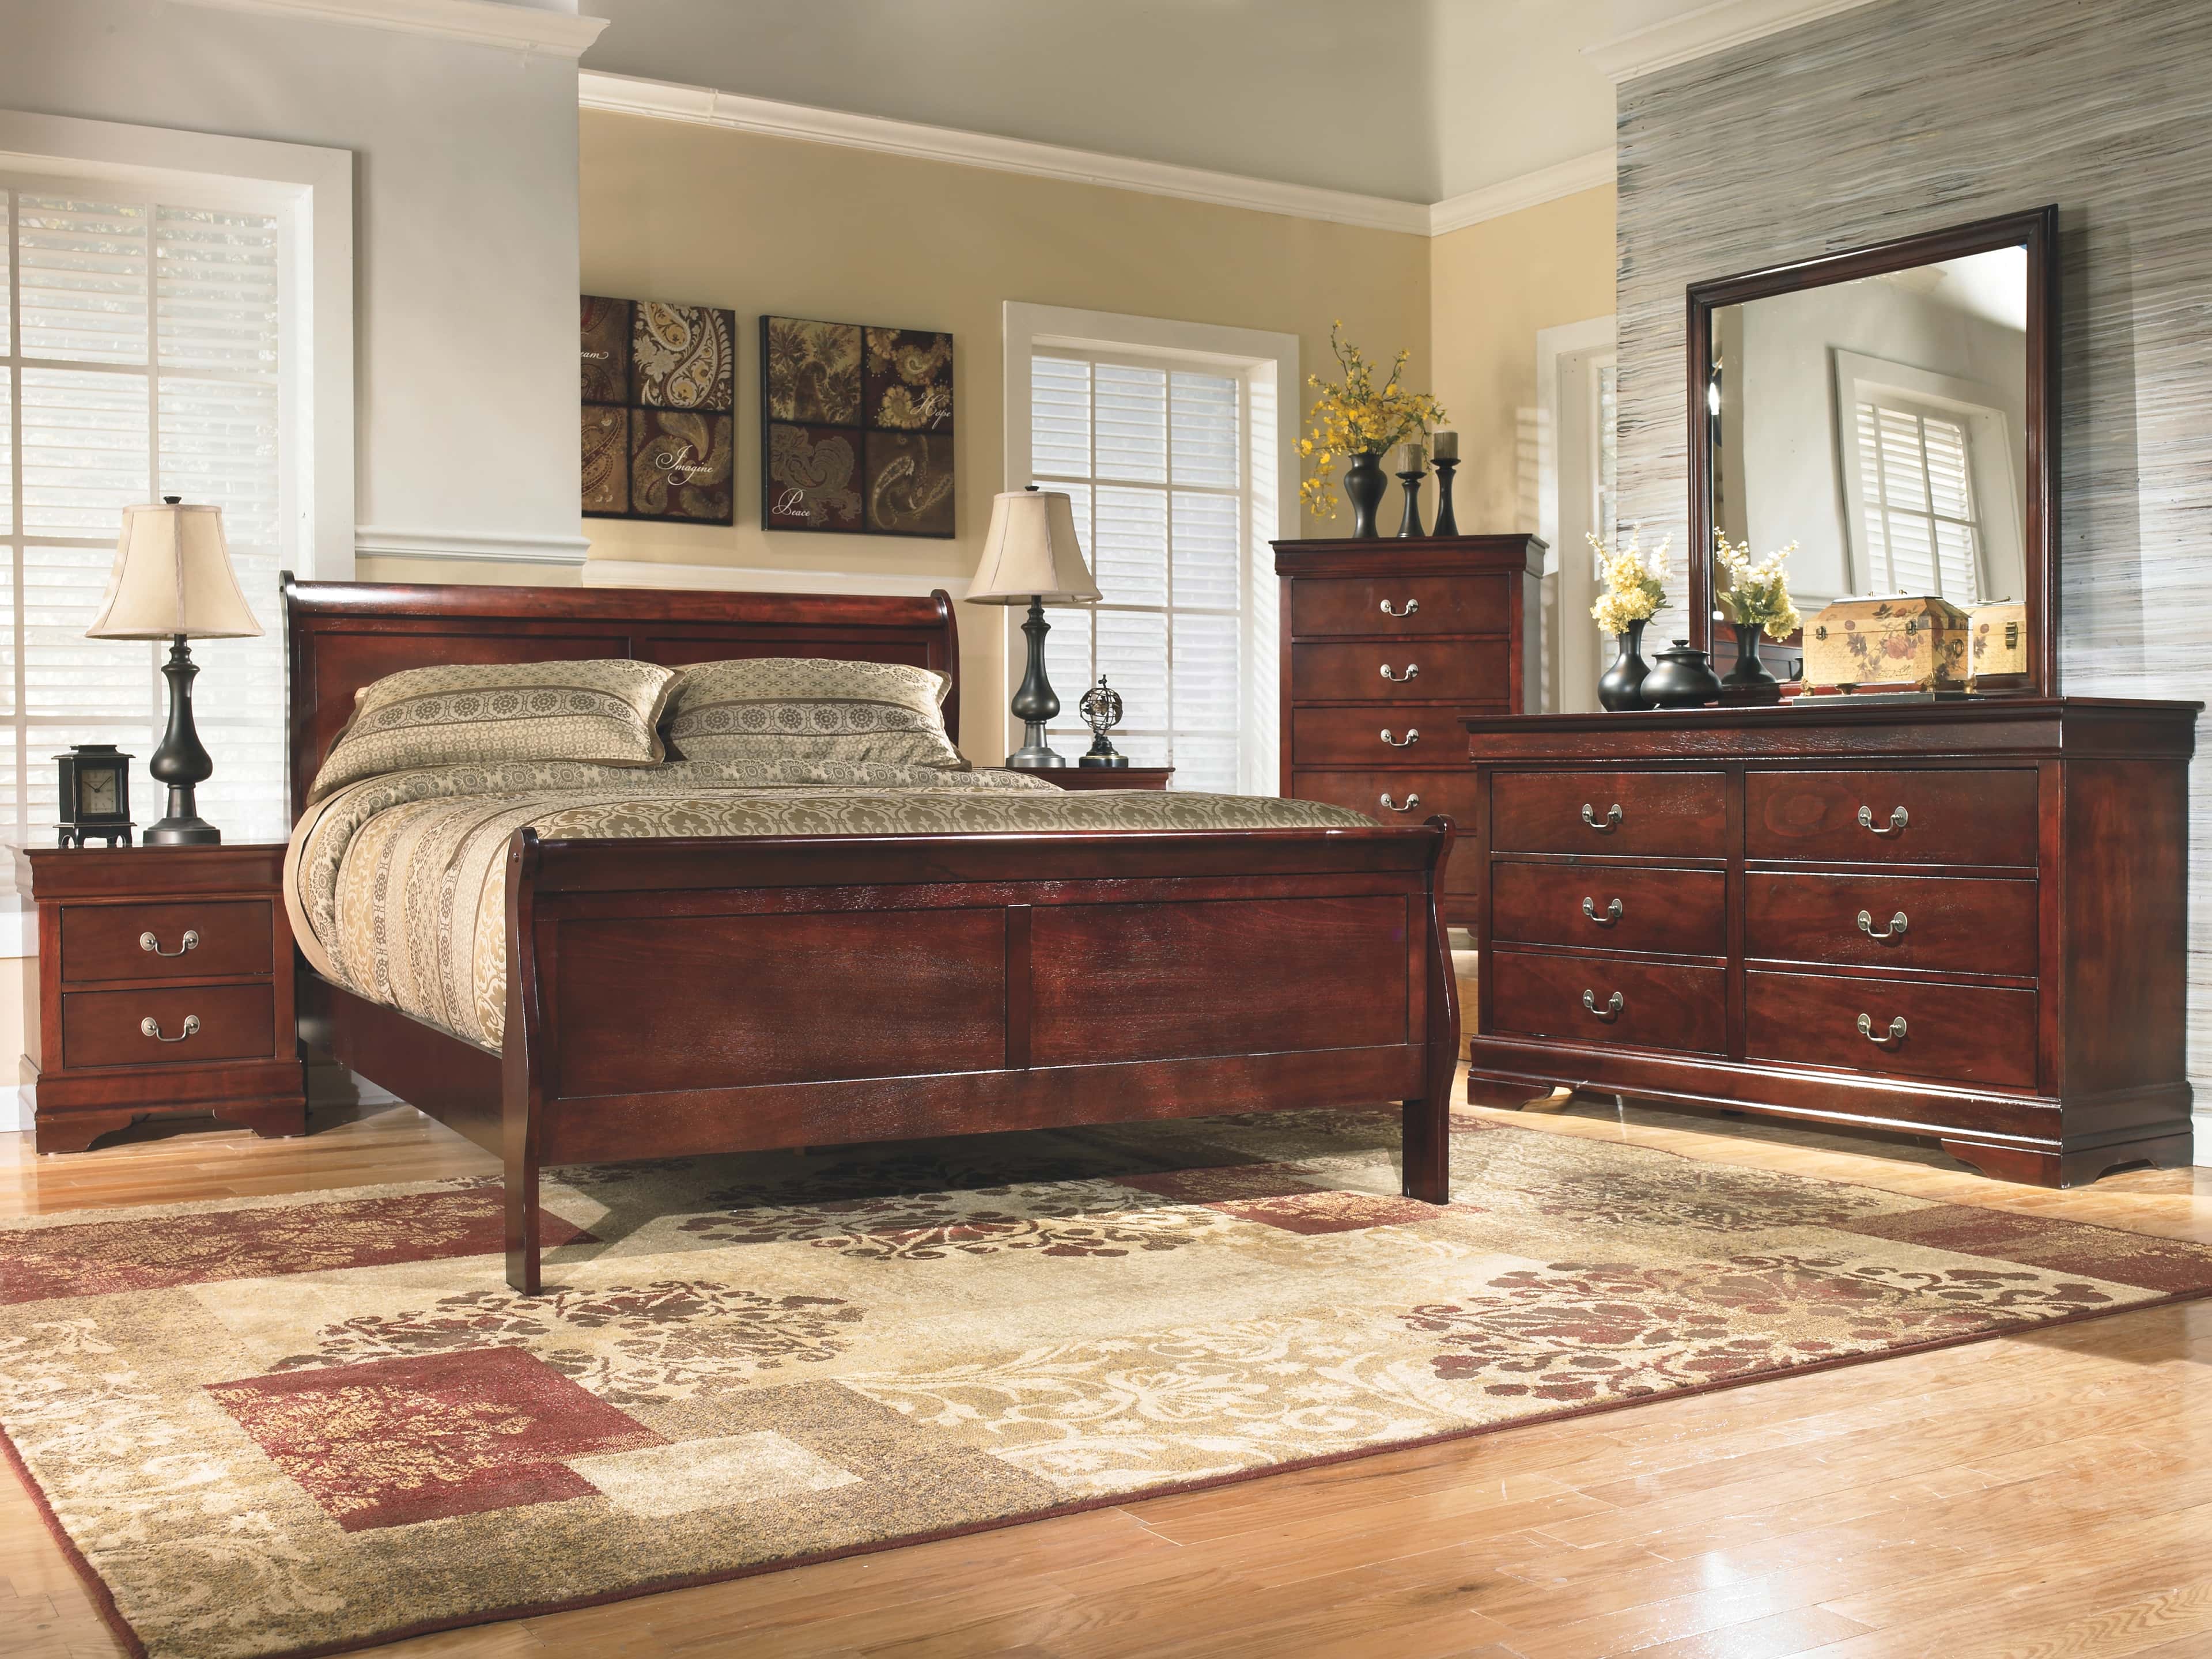 ashley bedroom furniture set with rock accents